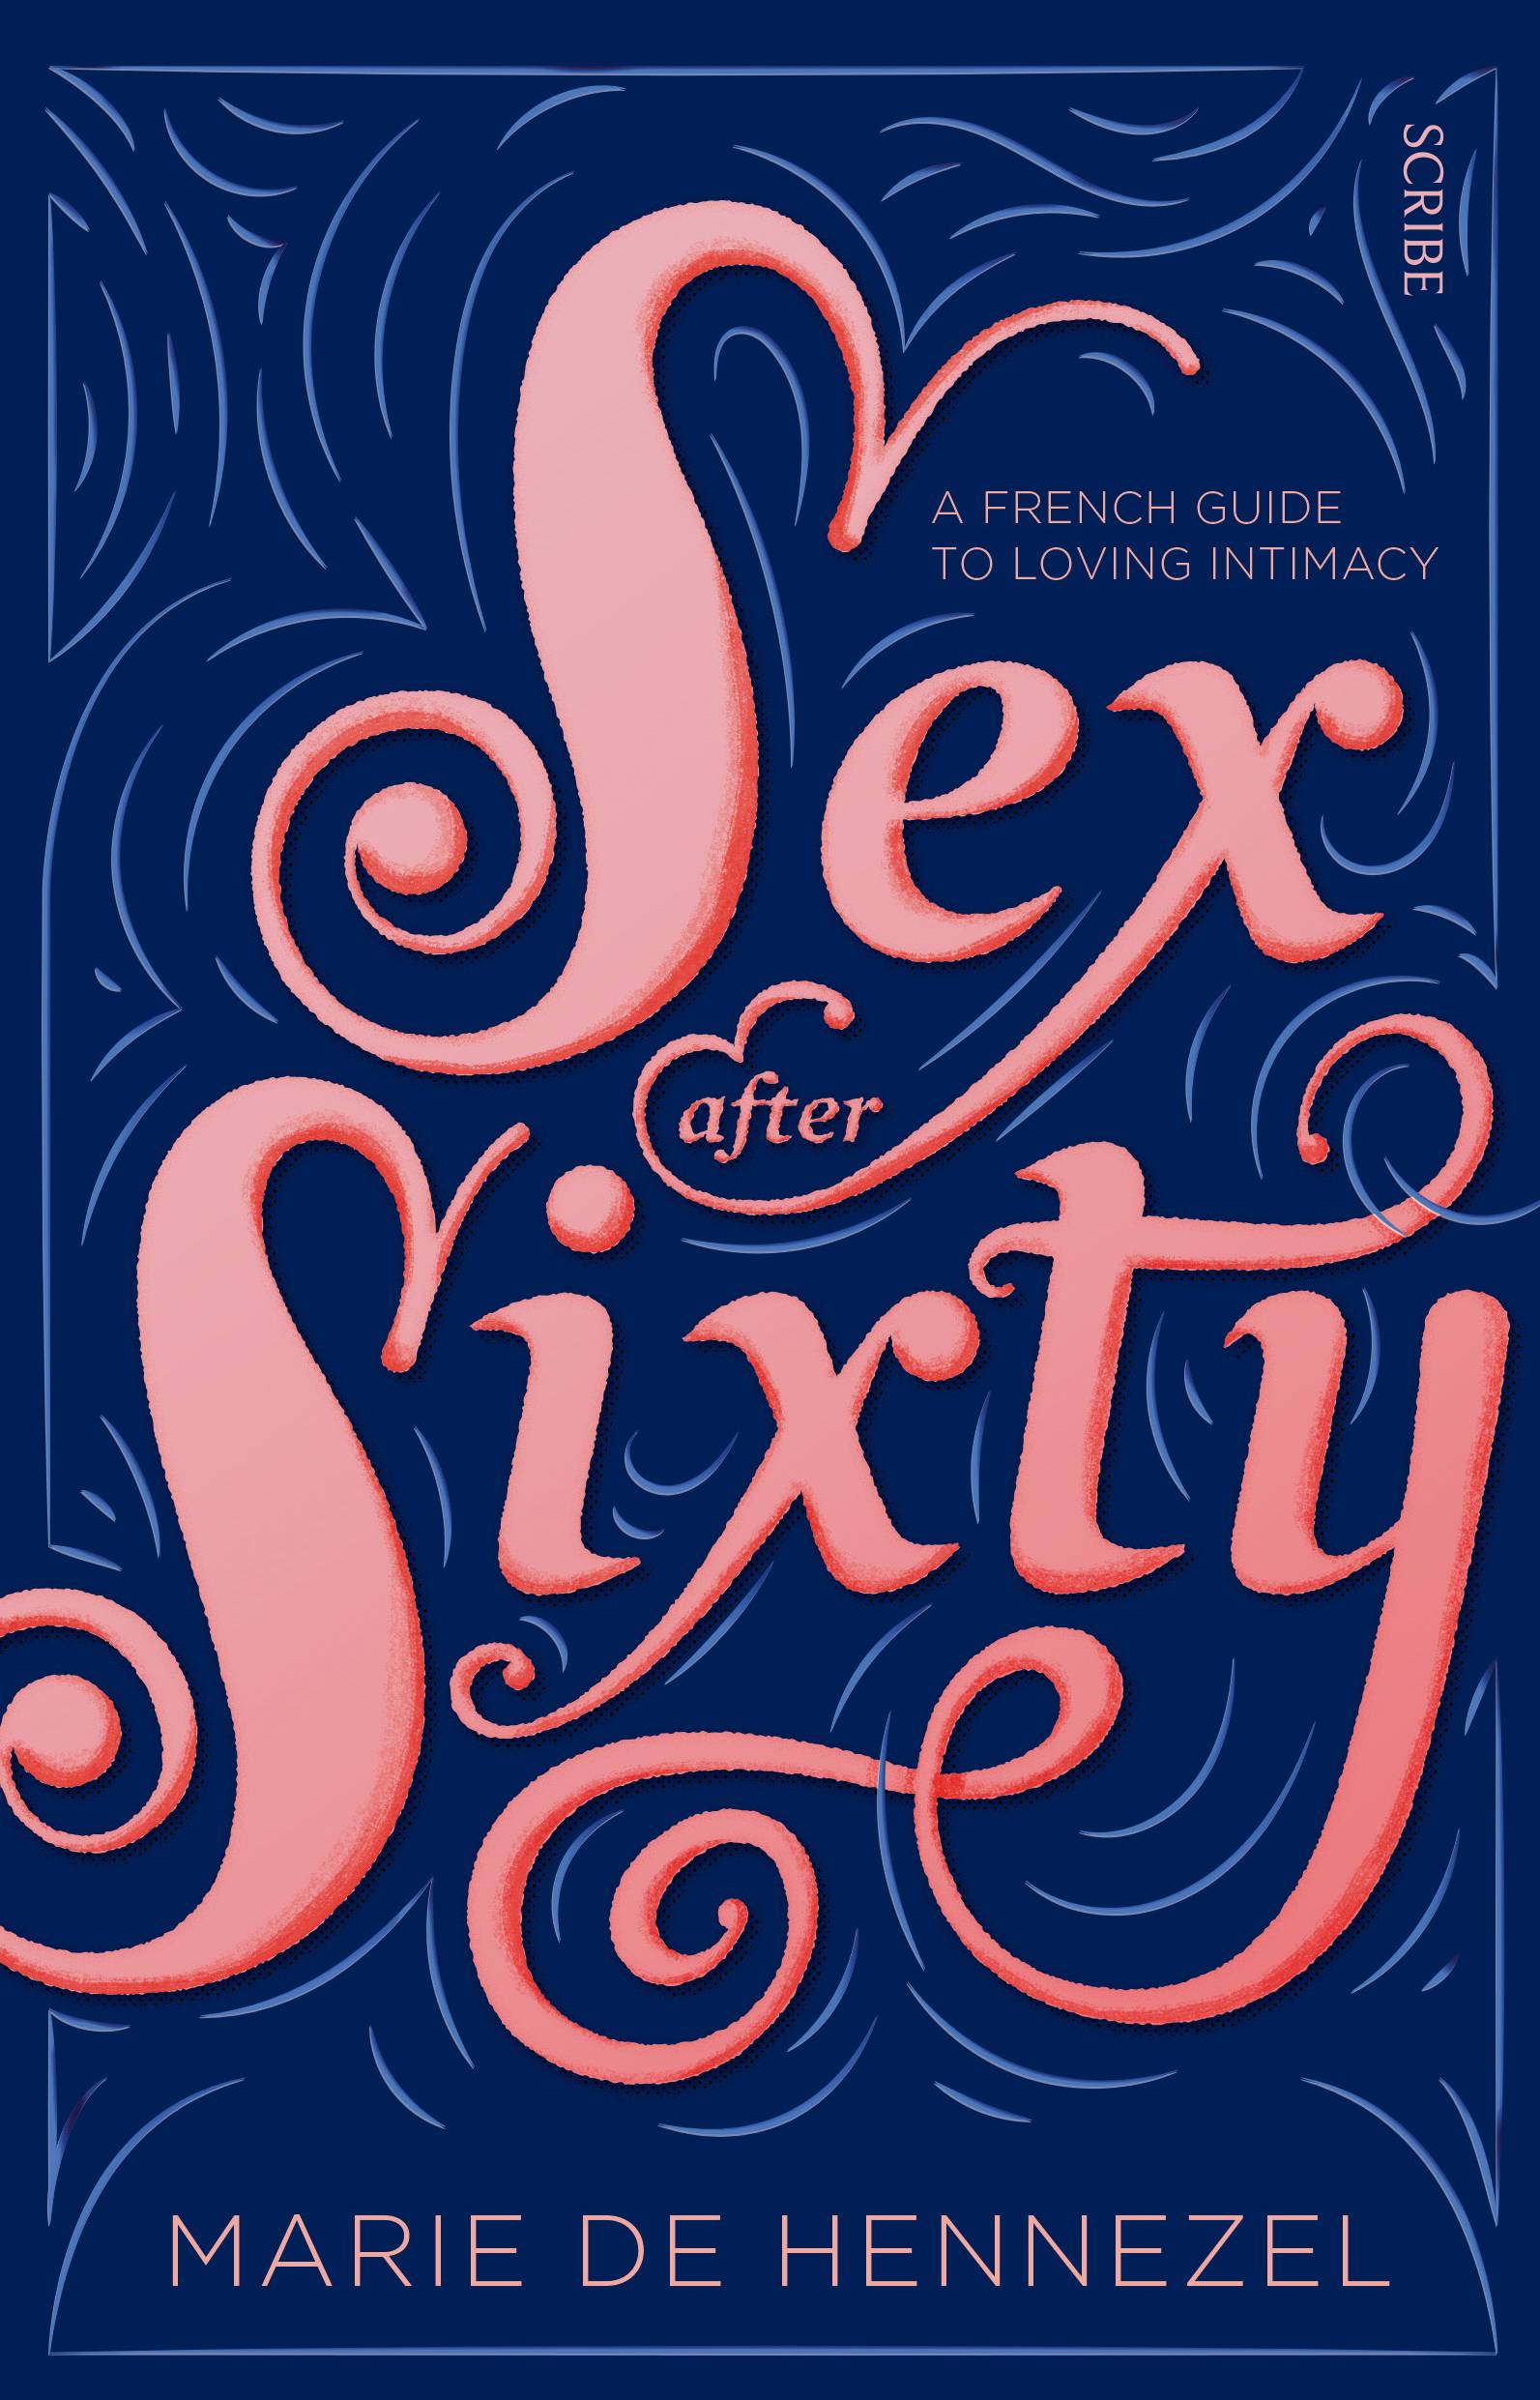 Sex After Sixty by Marie de Hennezel, published by Scribe